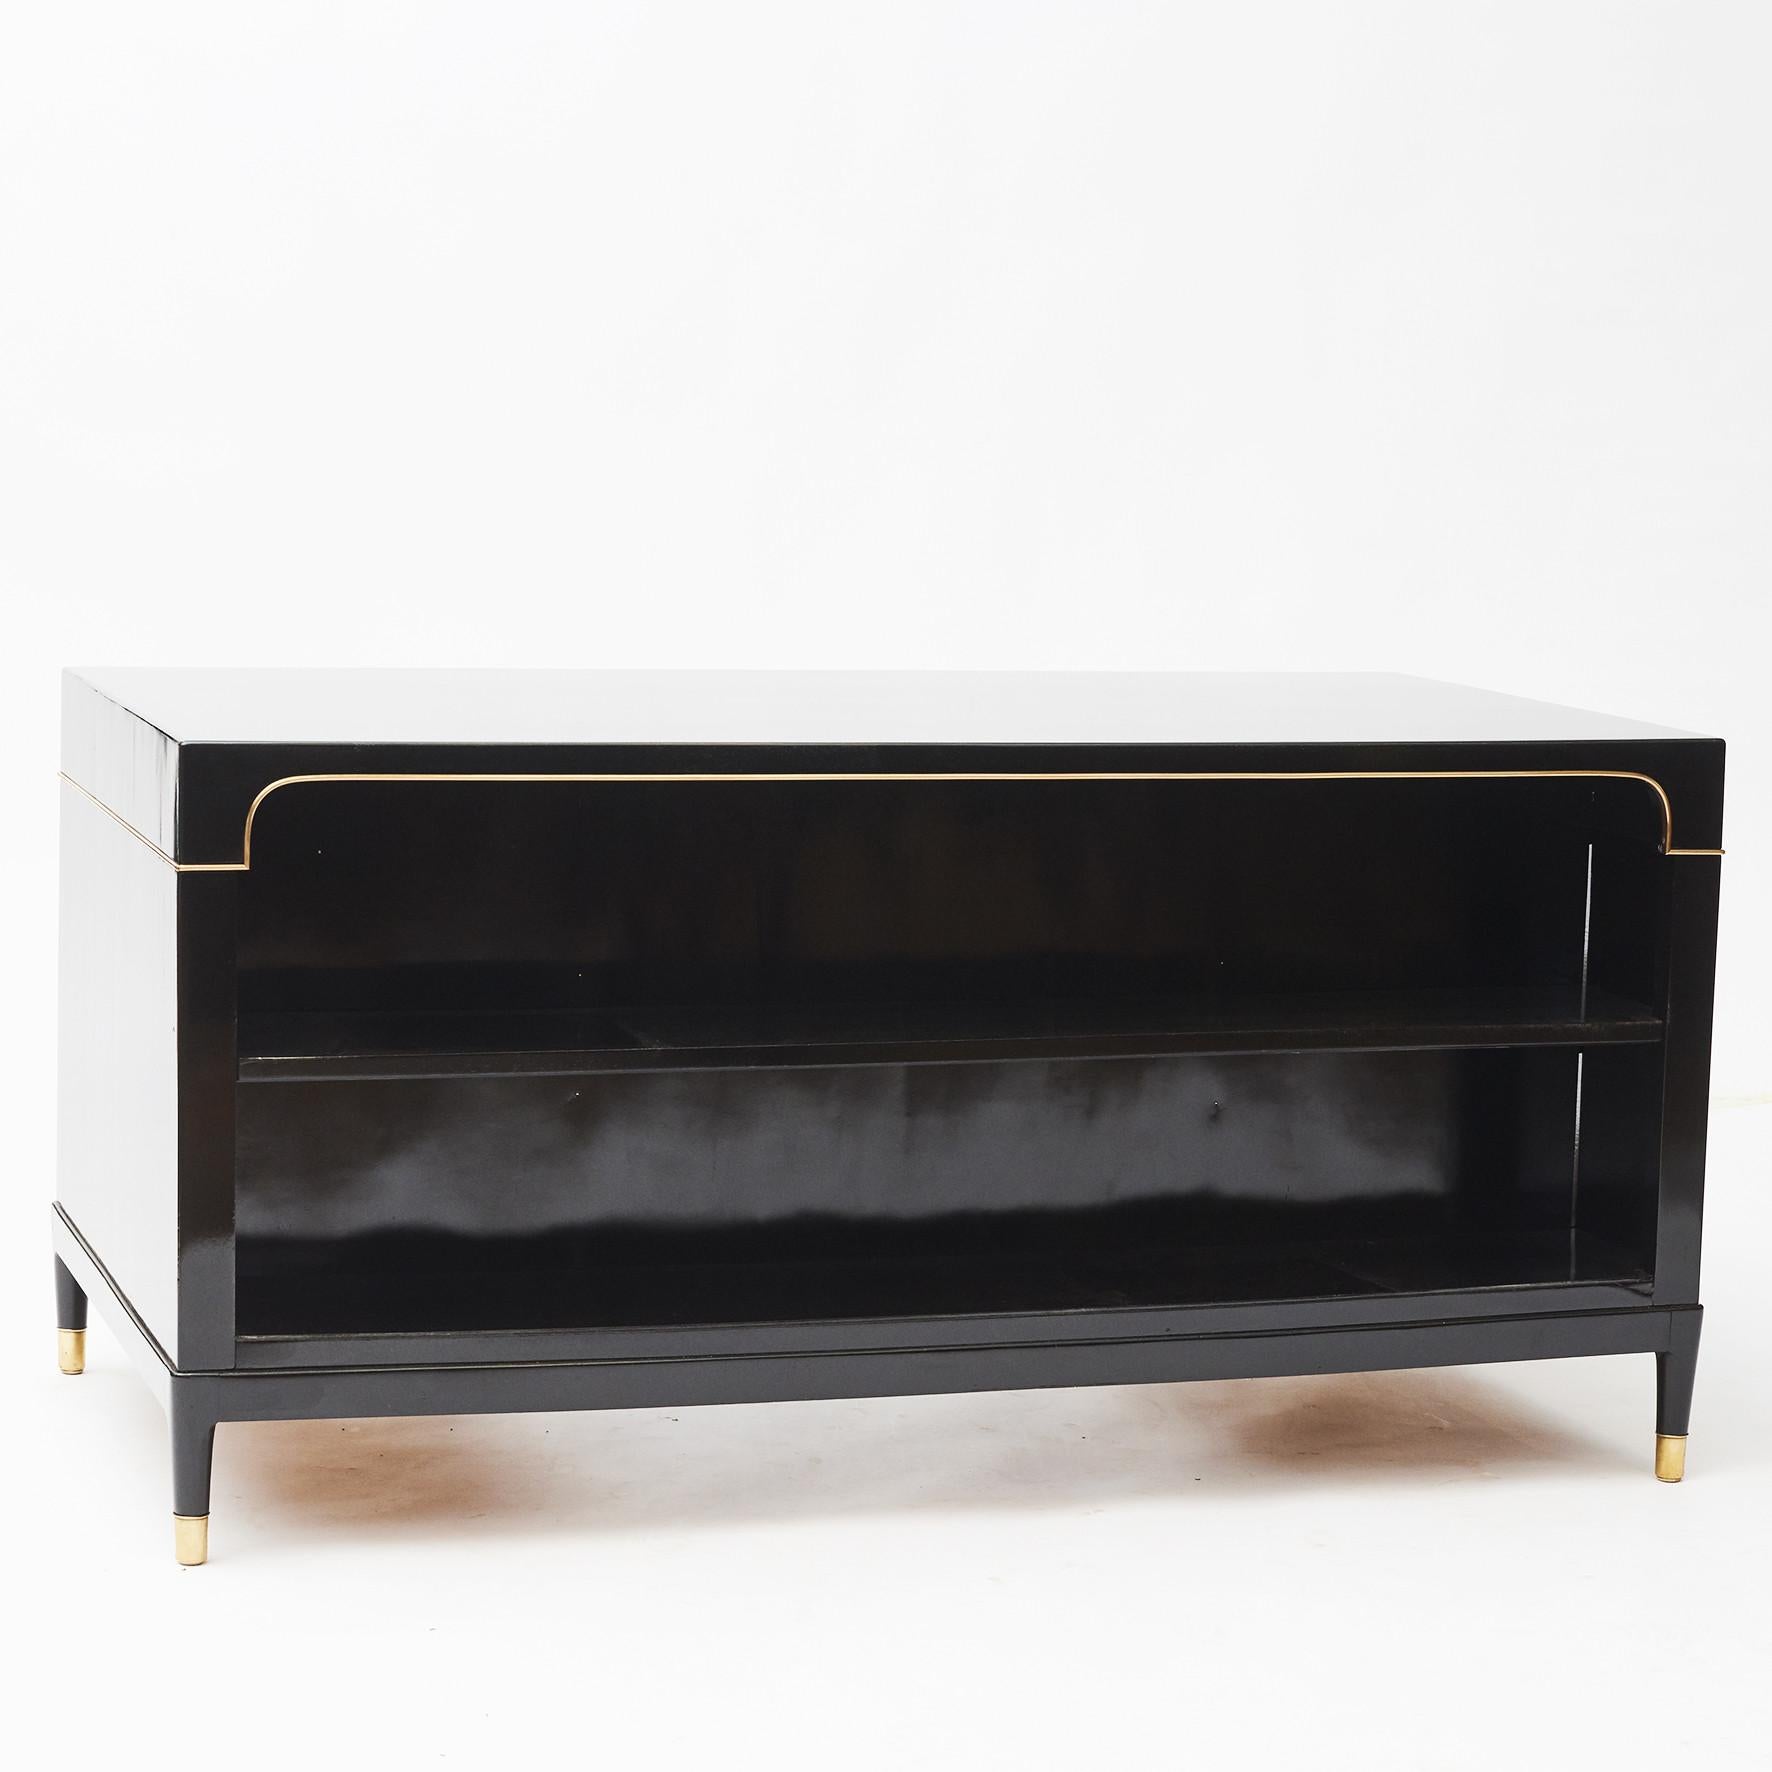 Freestanding desk in high-gloss black lacquered mahogany. The front includes drawers and a door, shelves to the opposite side of the desk.
Freestanding
Adorned with an all around brass trim.
This desk is raised by eight legs with brass foot